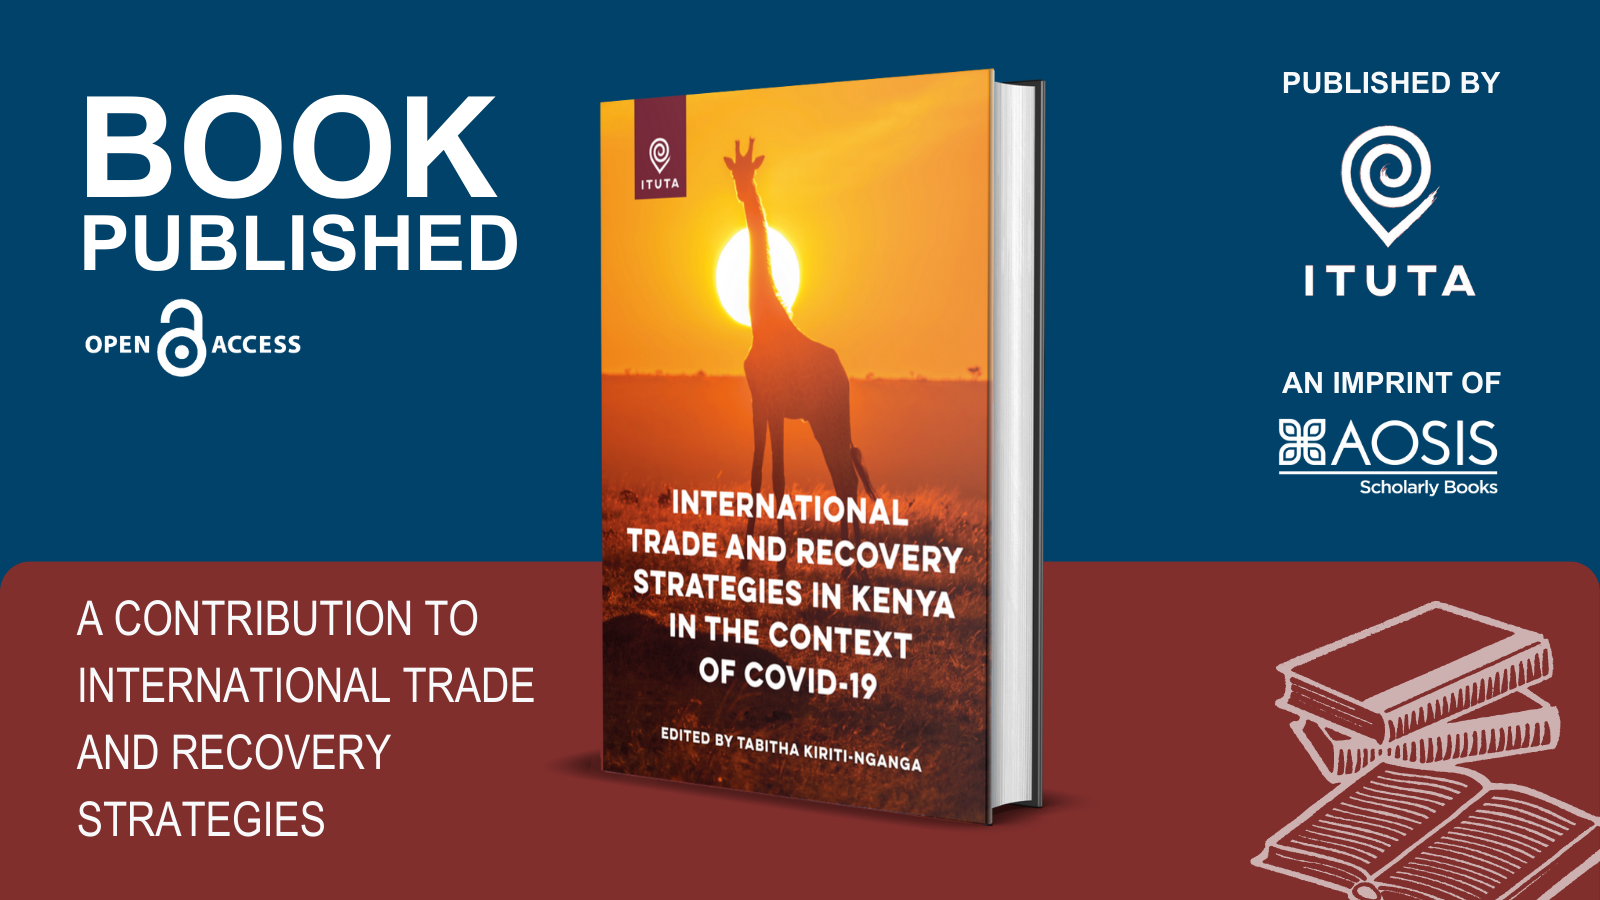 Ituta Books publishes ‘International trade and recovery strategies in Kenya in the context of COVID-19’